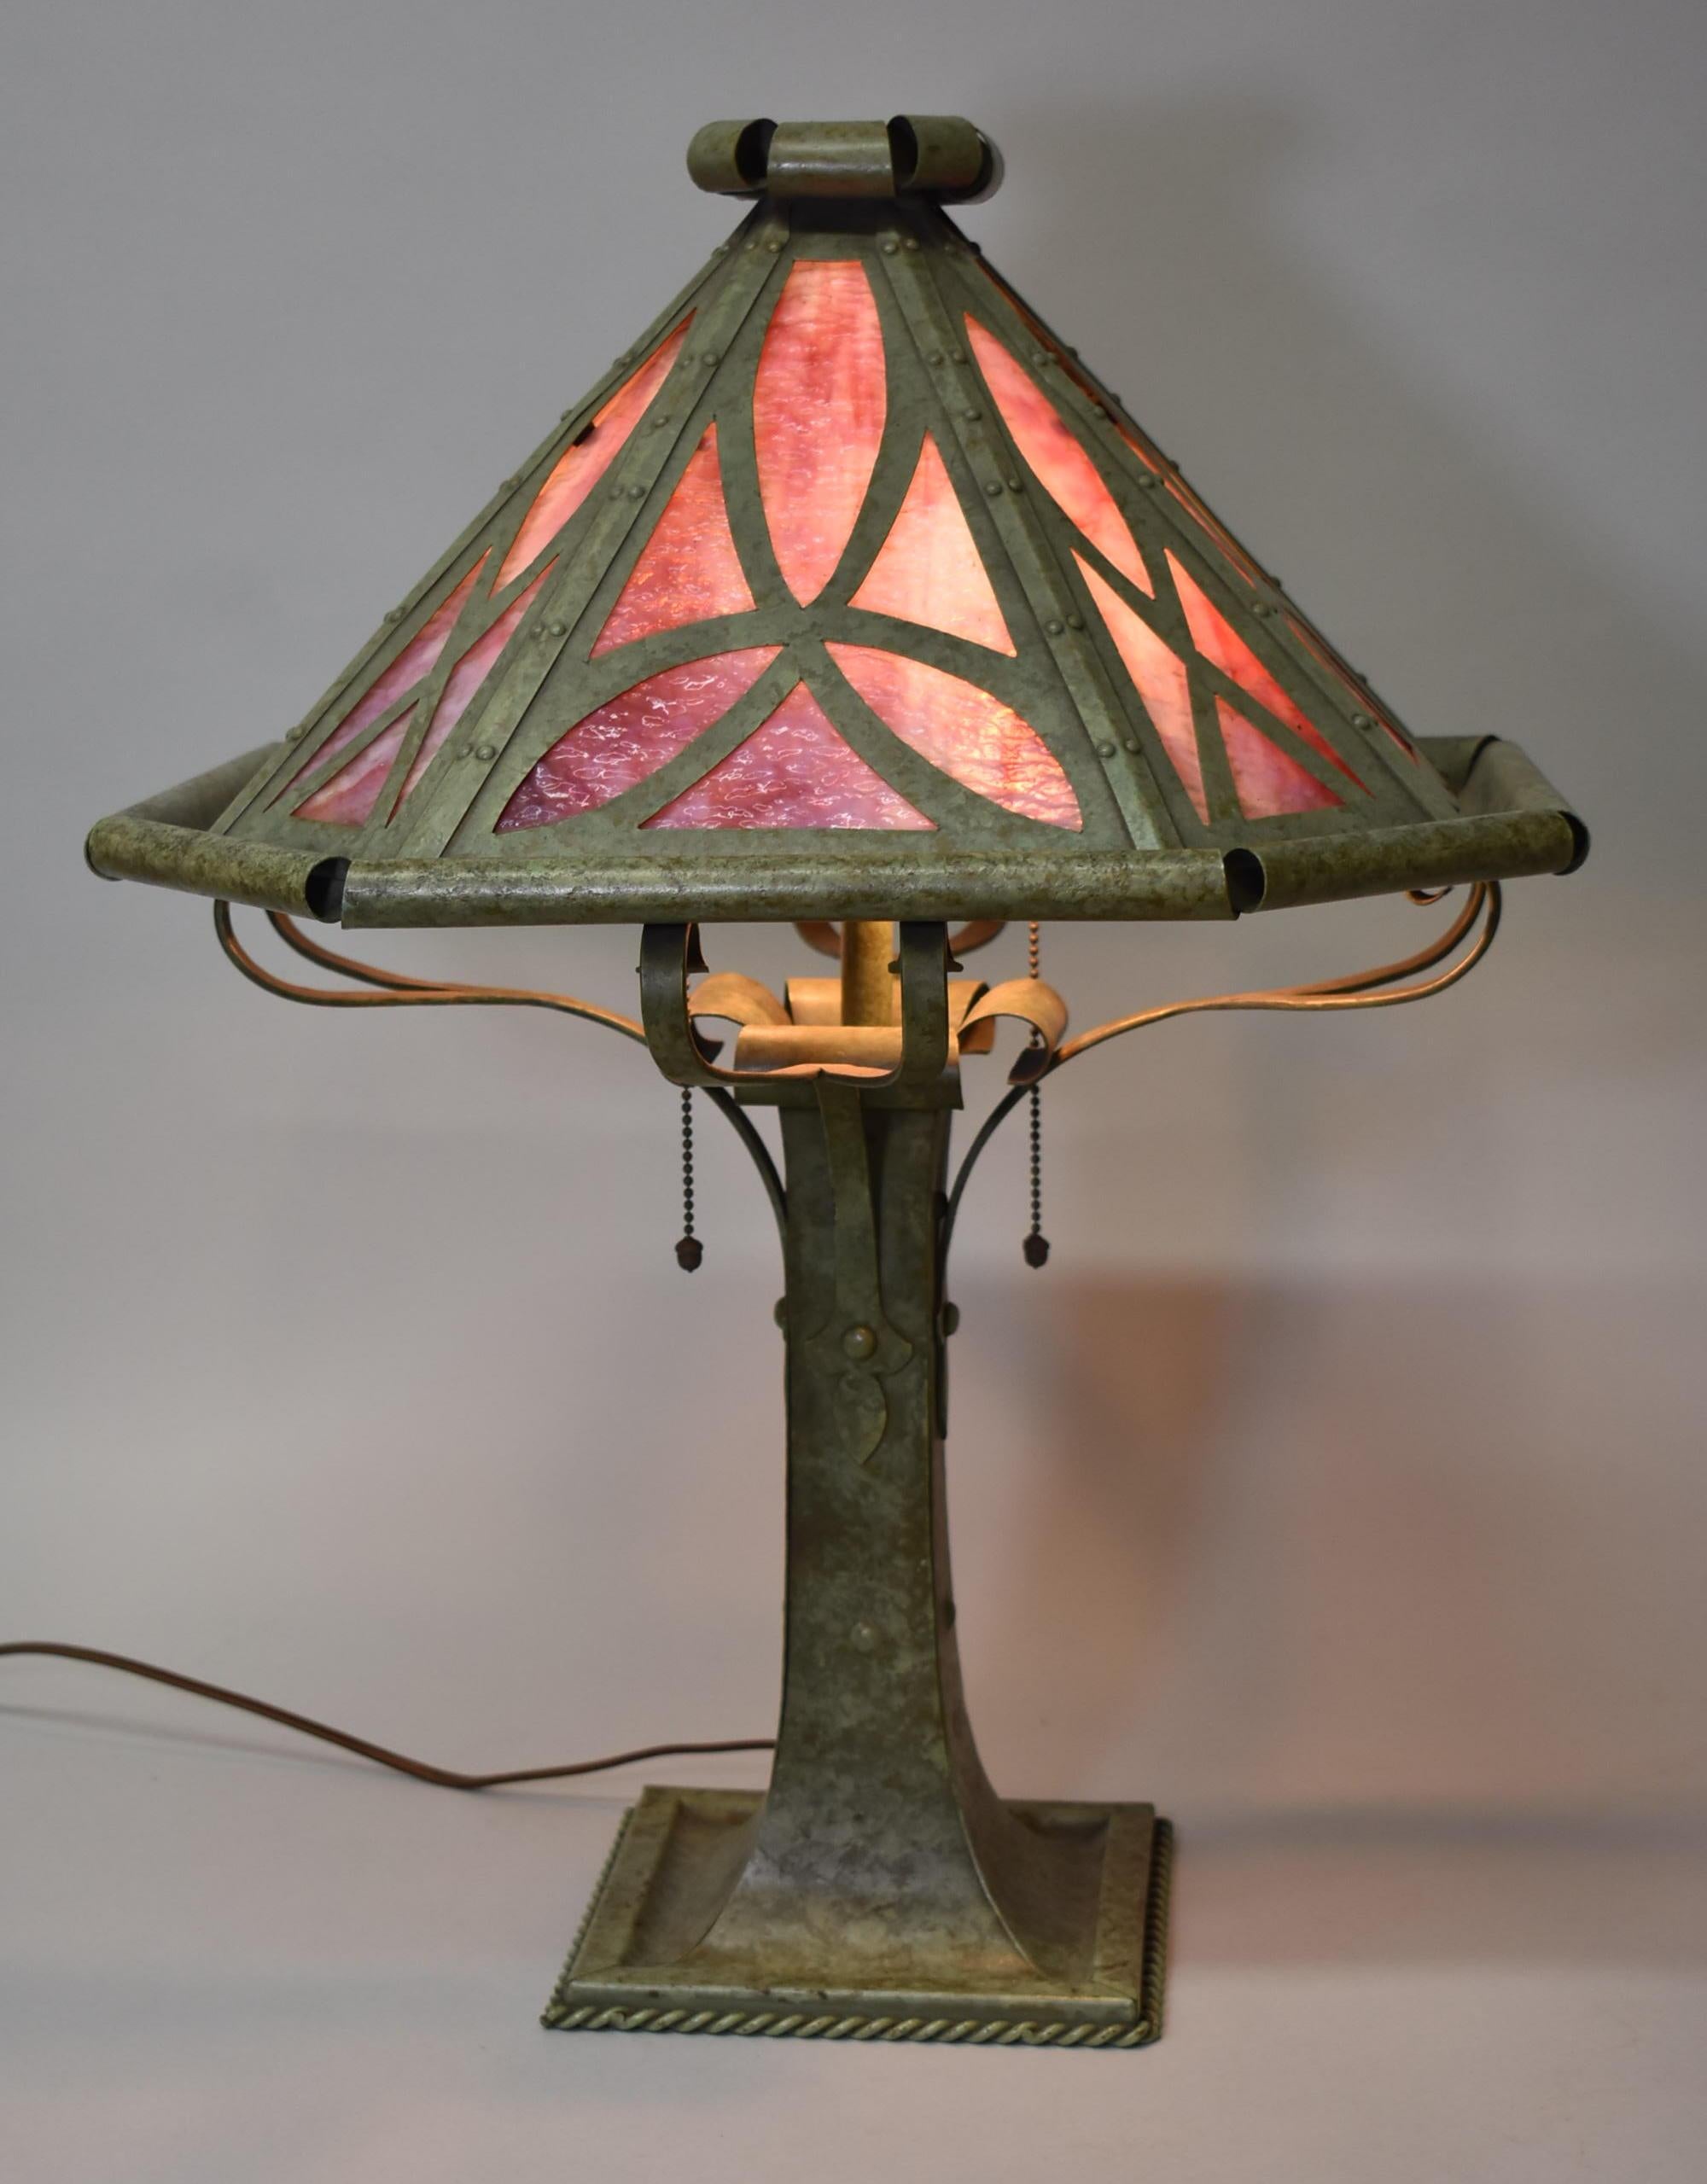 Gothic Revival slag glass lamp by Bradley & Hubbard. Fabulous patina. Two Hubbell sockets with acorn pull chains. Eight cranberry and opal panels. Shade has riveted construction. Rewired with new rayon cord.